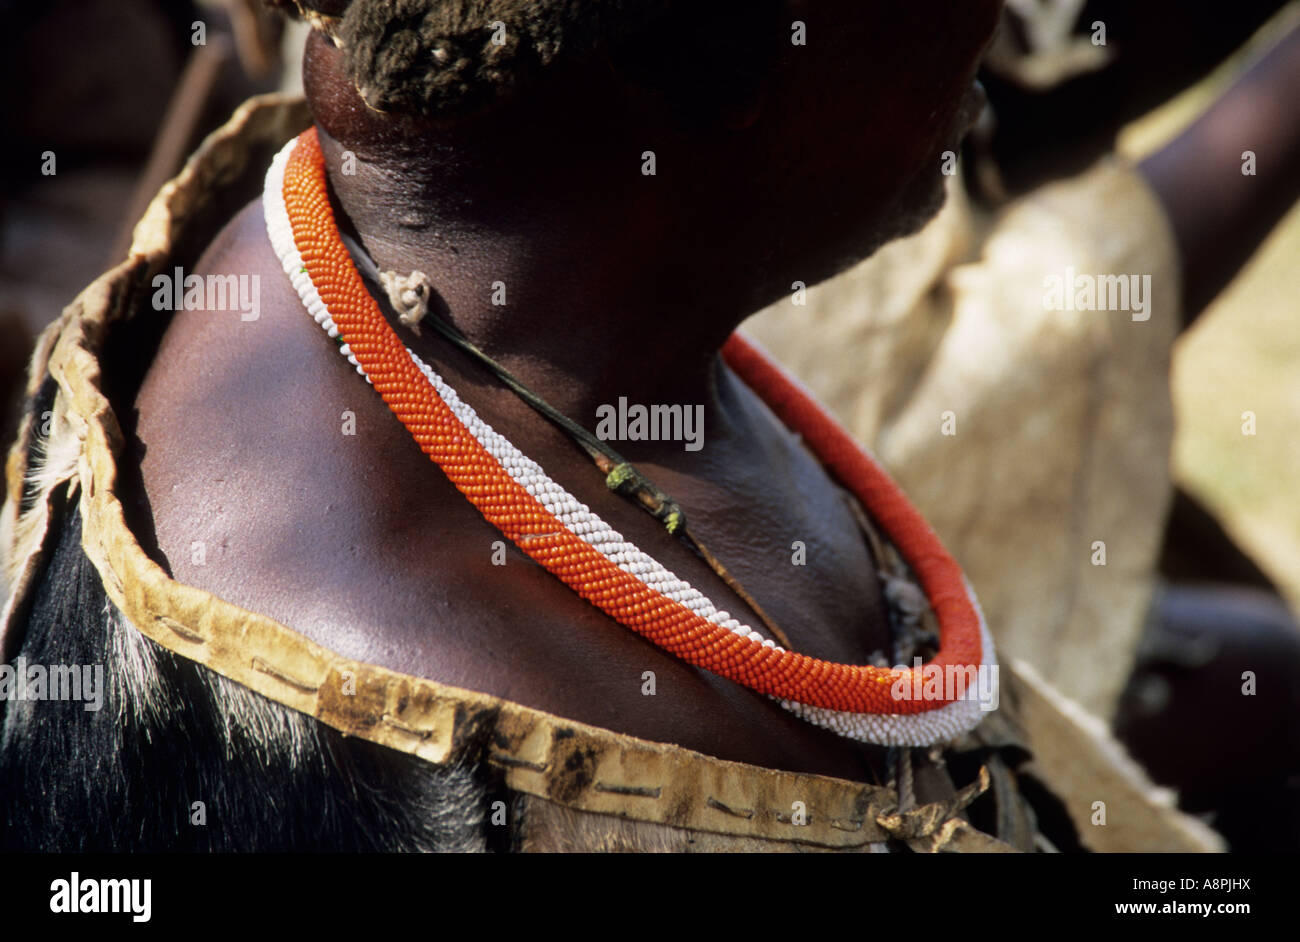 Culture, people, traditional African ethnic dress, bead jewellery, Ndebele adult man, body decoration, South Africa, tribal costume Stock Photo